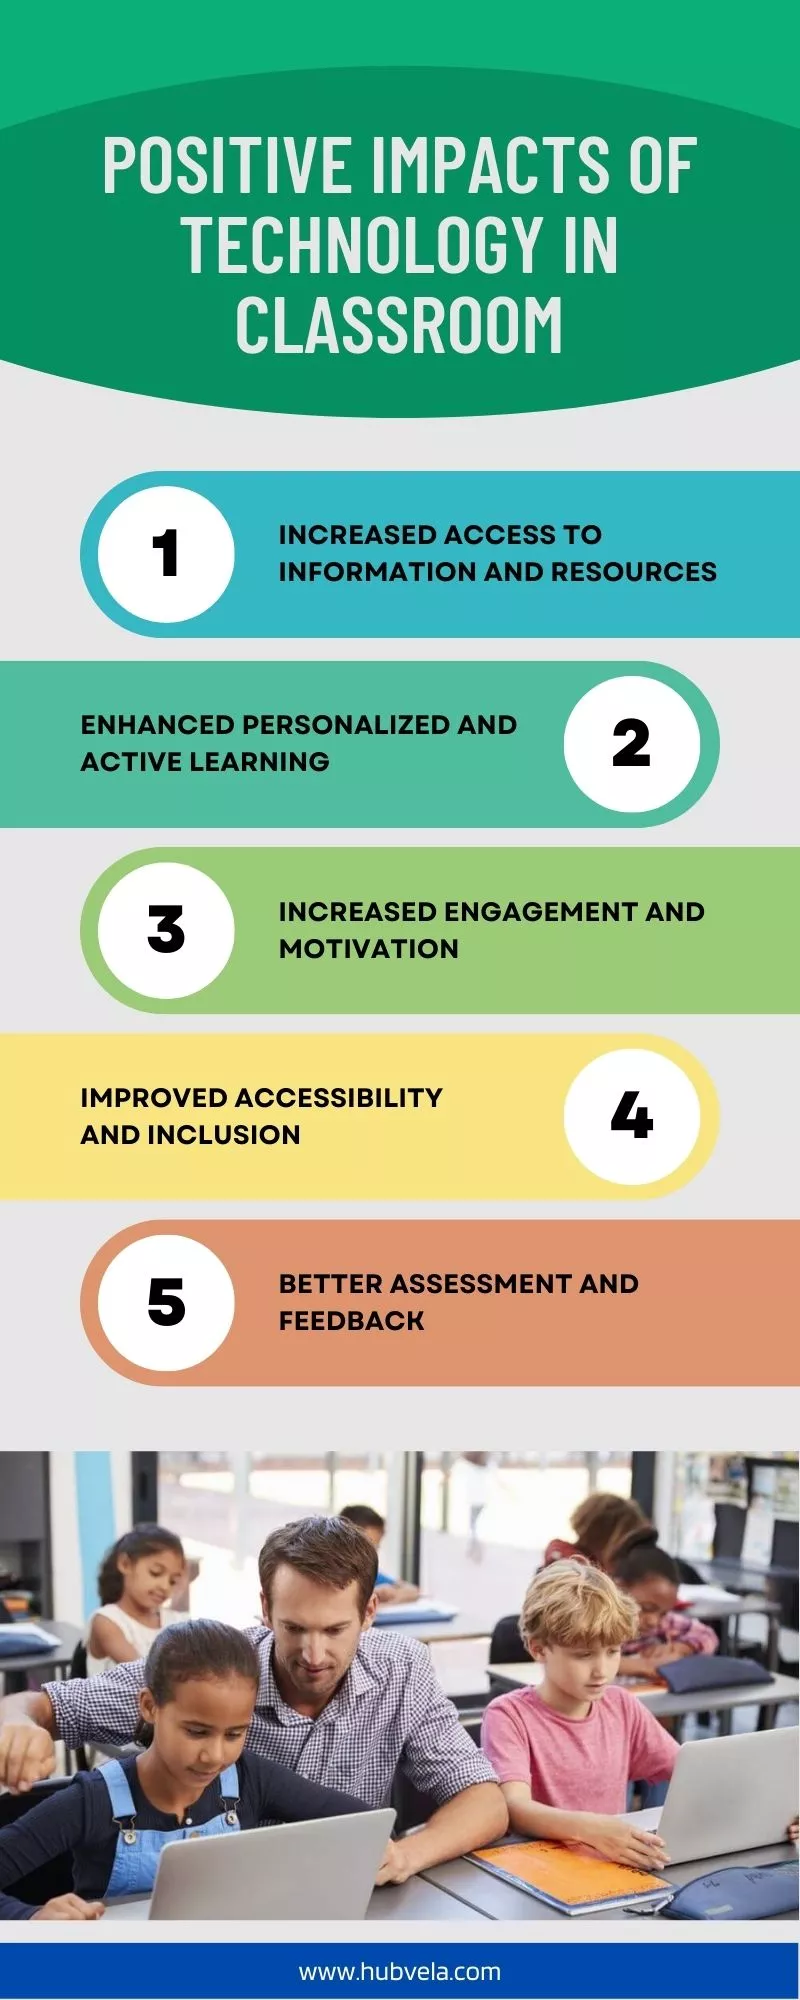 Positive Impacts of Technology in Classroom infographic